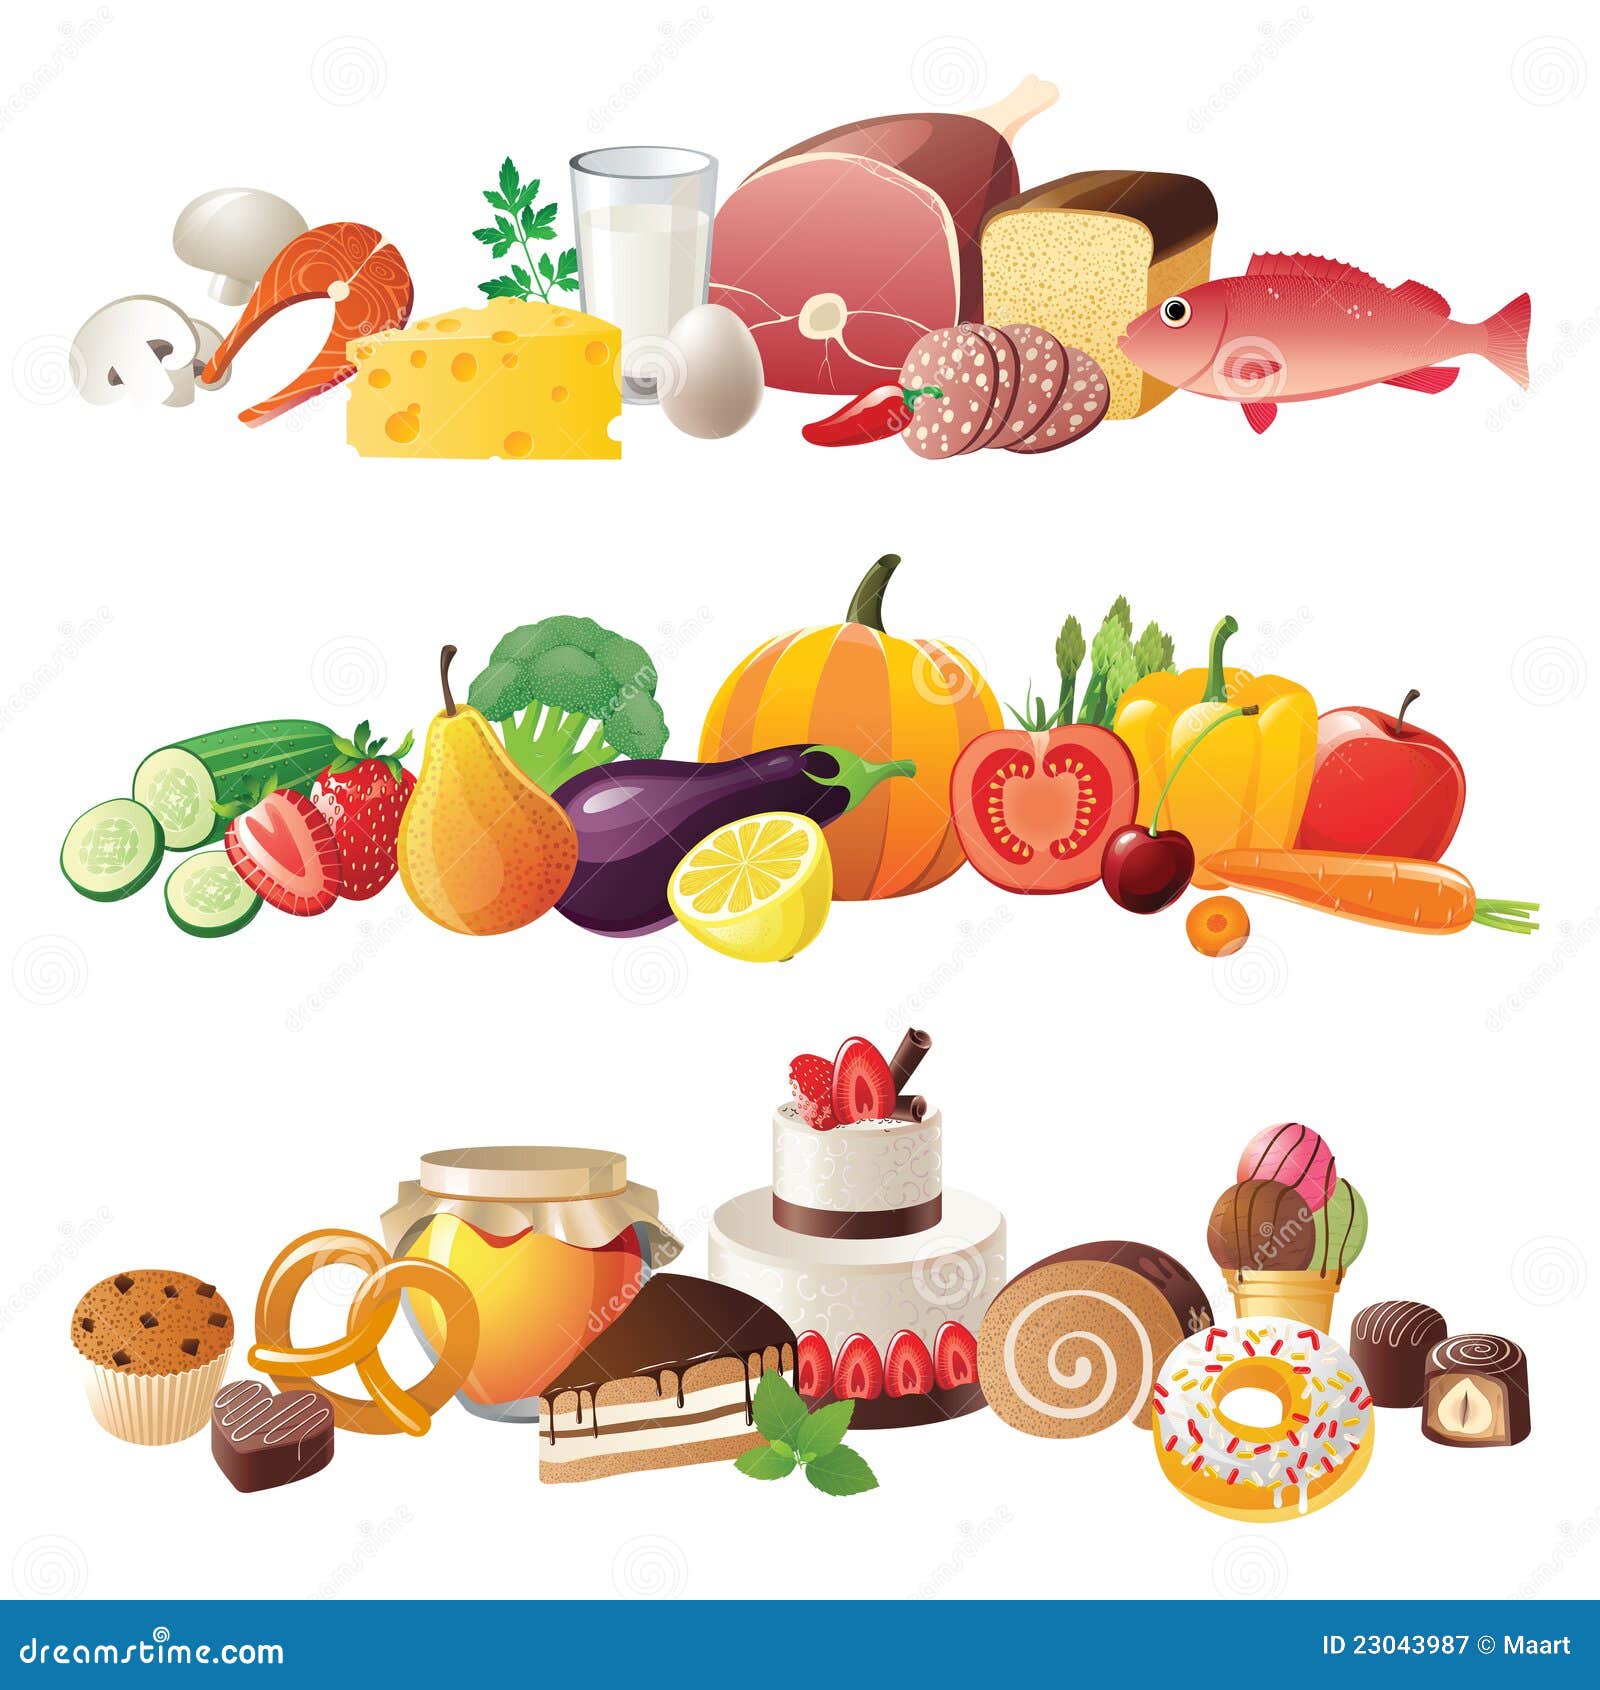 Food Borders Royalty Free Stock Photography - Image: 23043987